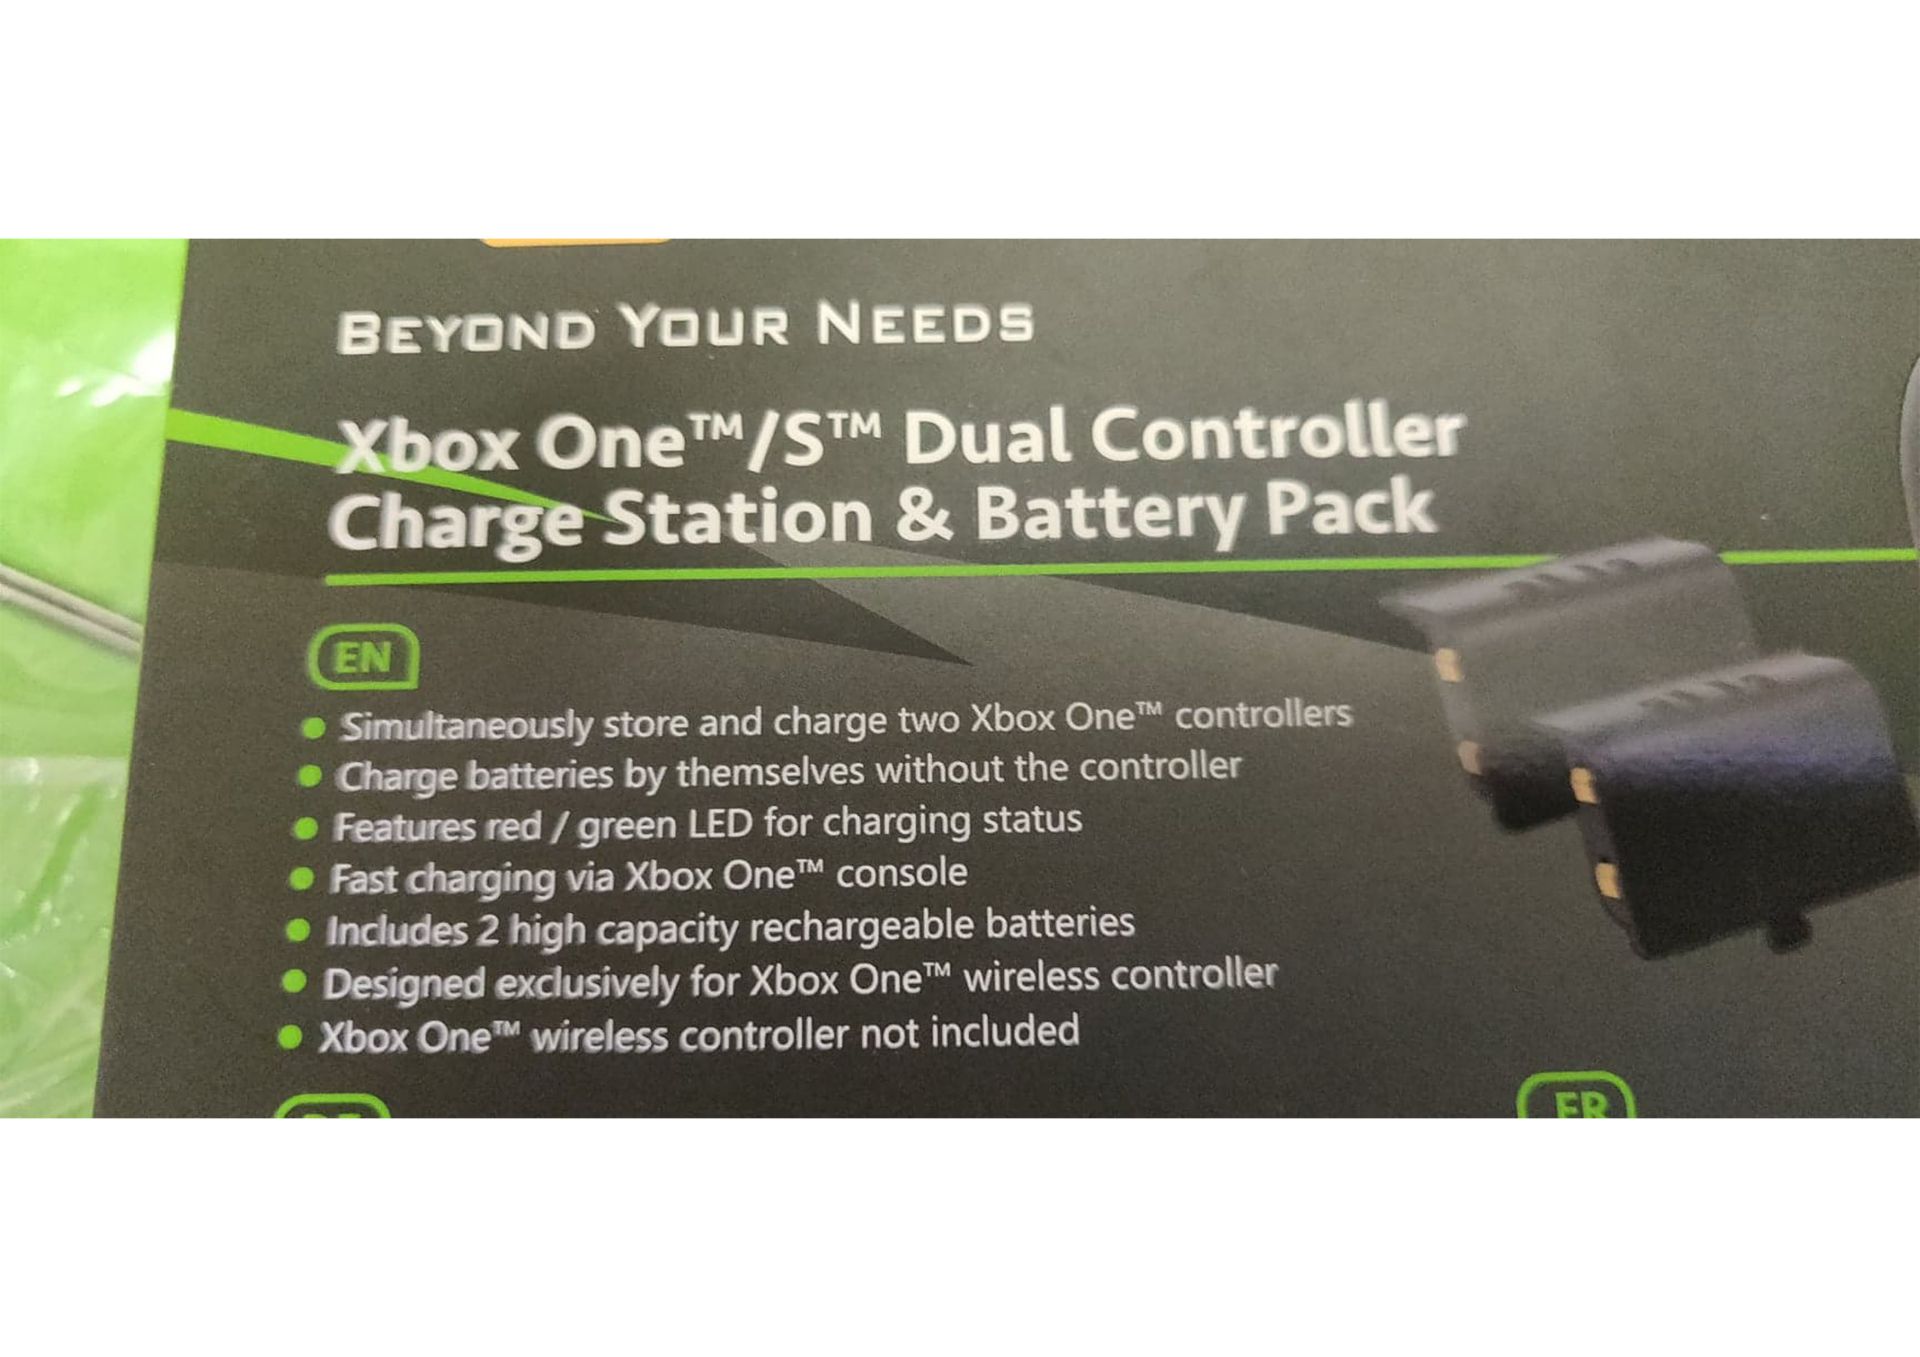 Box of 42 New Xbox One/S Dual Controller Charge Stations & Battery Packs - Image 2 of 15